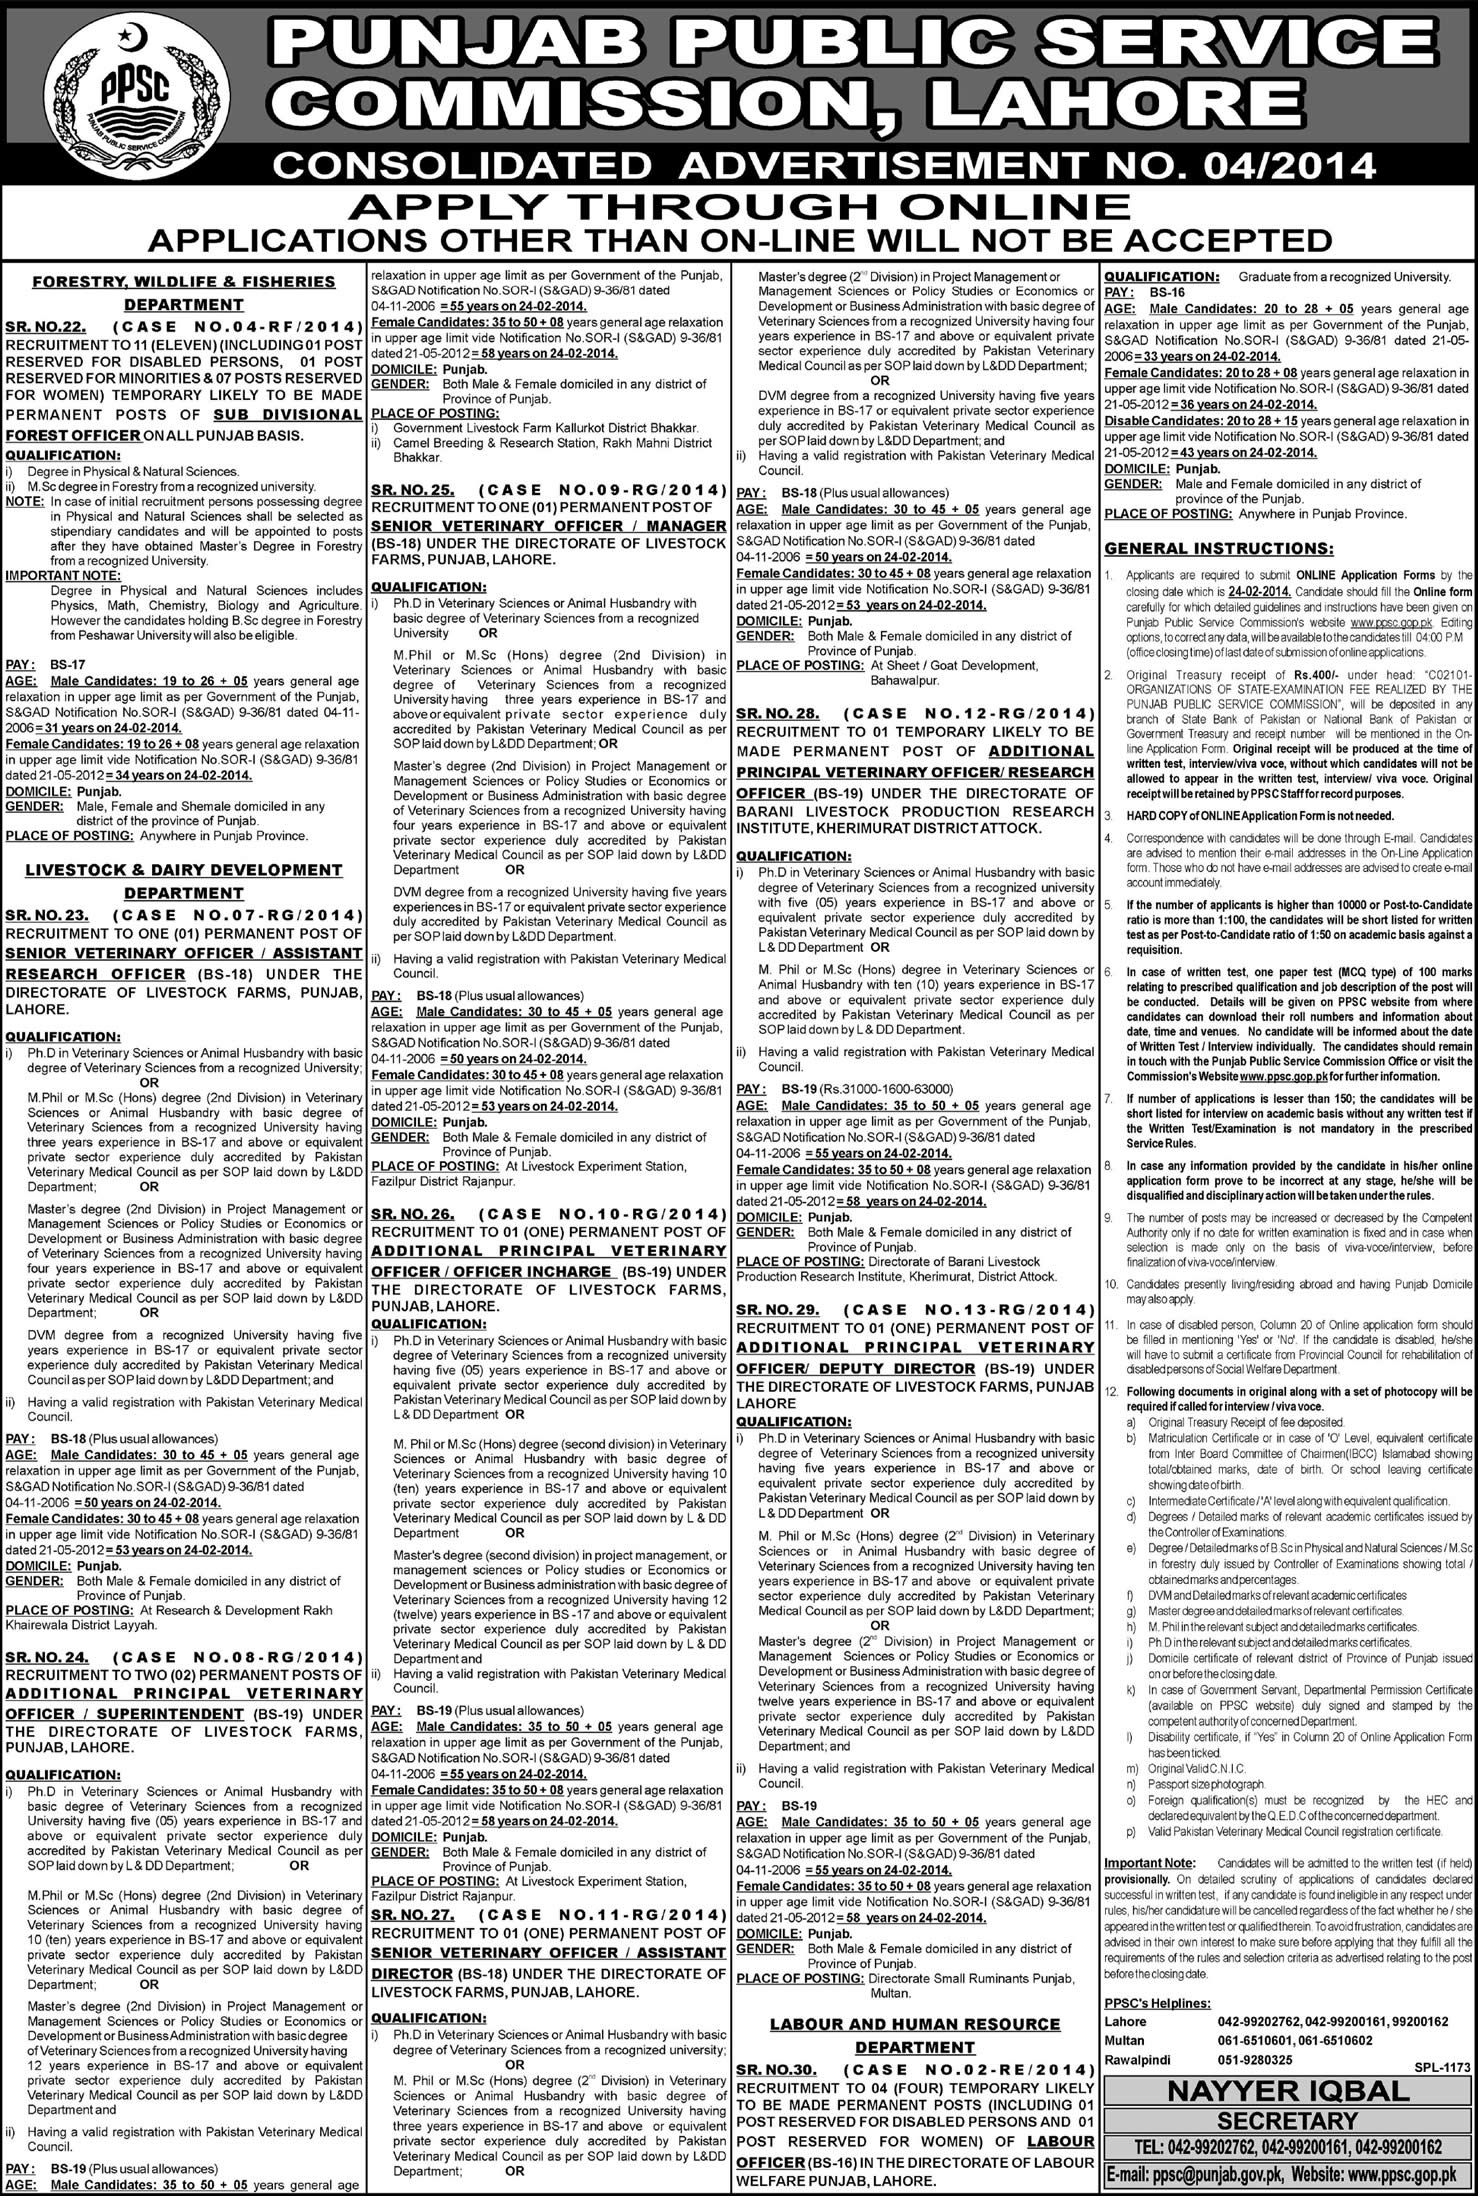 PPSC Jobs February 2014 Consolidated Advertisement No 04/2014